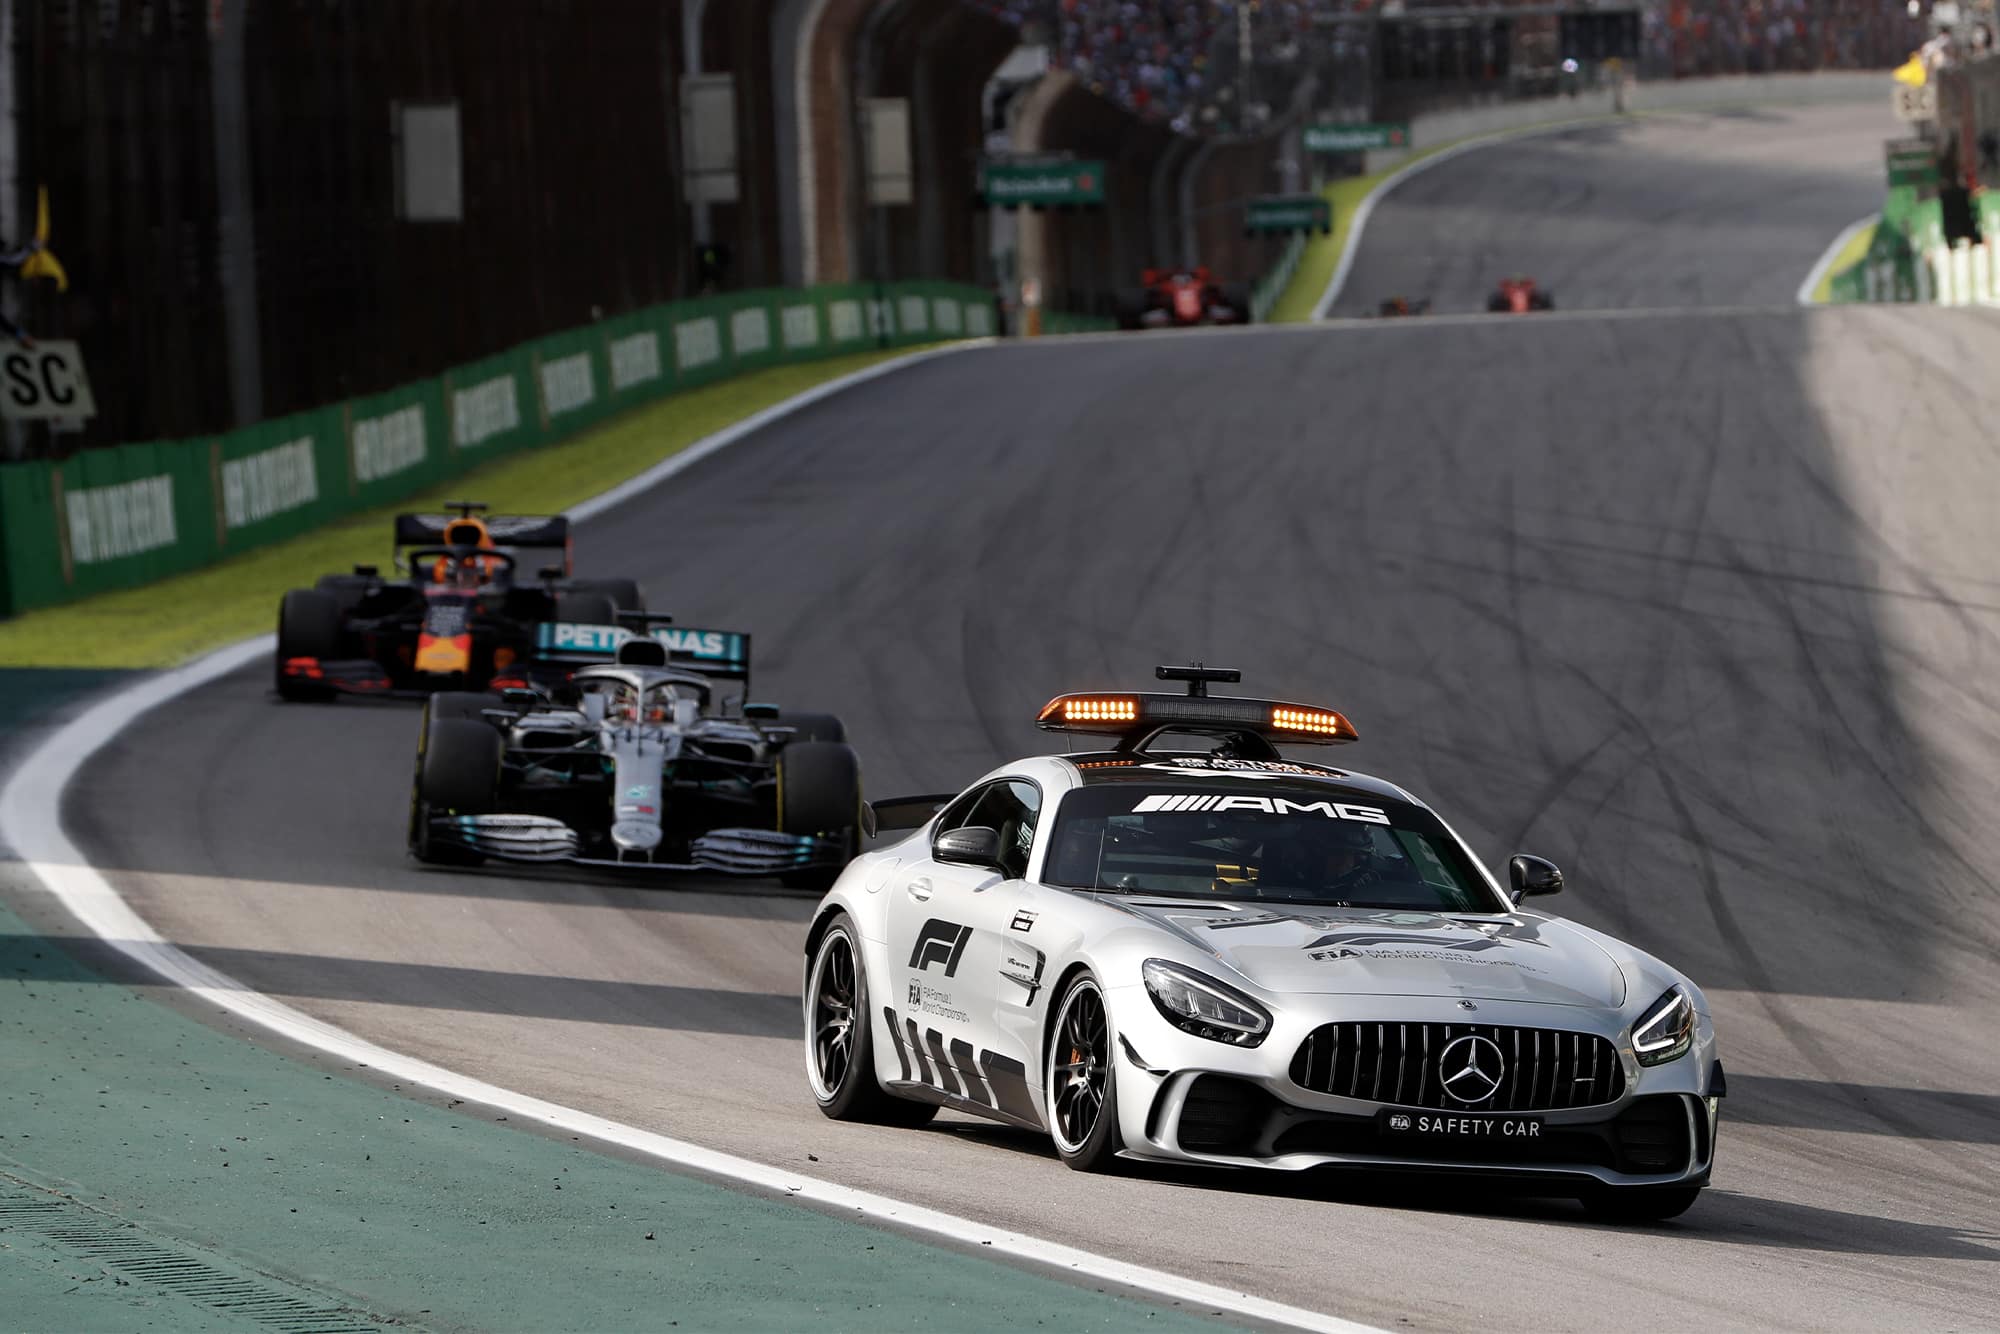 The Safety Car leads Lewis Hamilton and Max Verstappen during the 2019 Brazilian Grand Prix